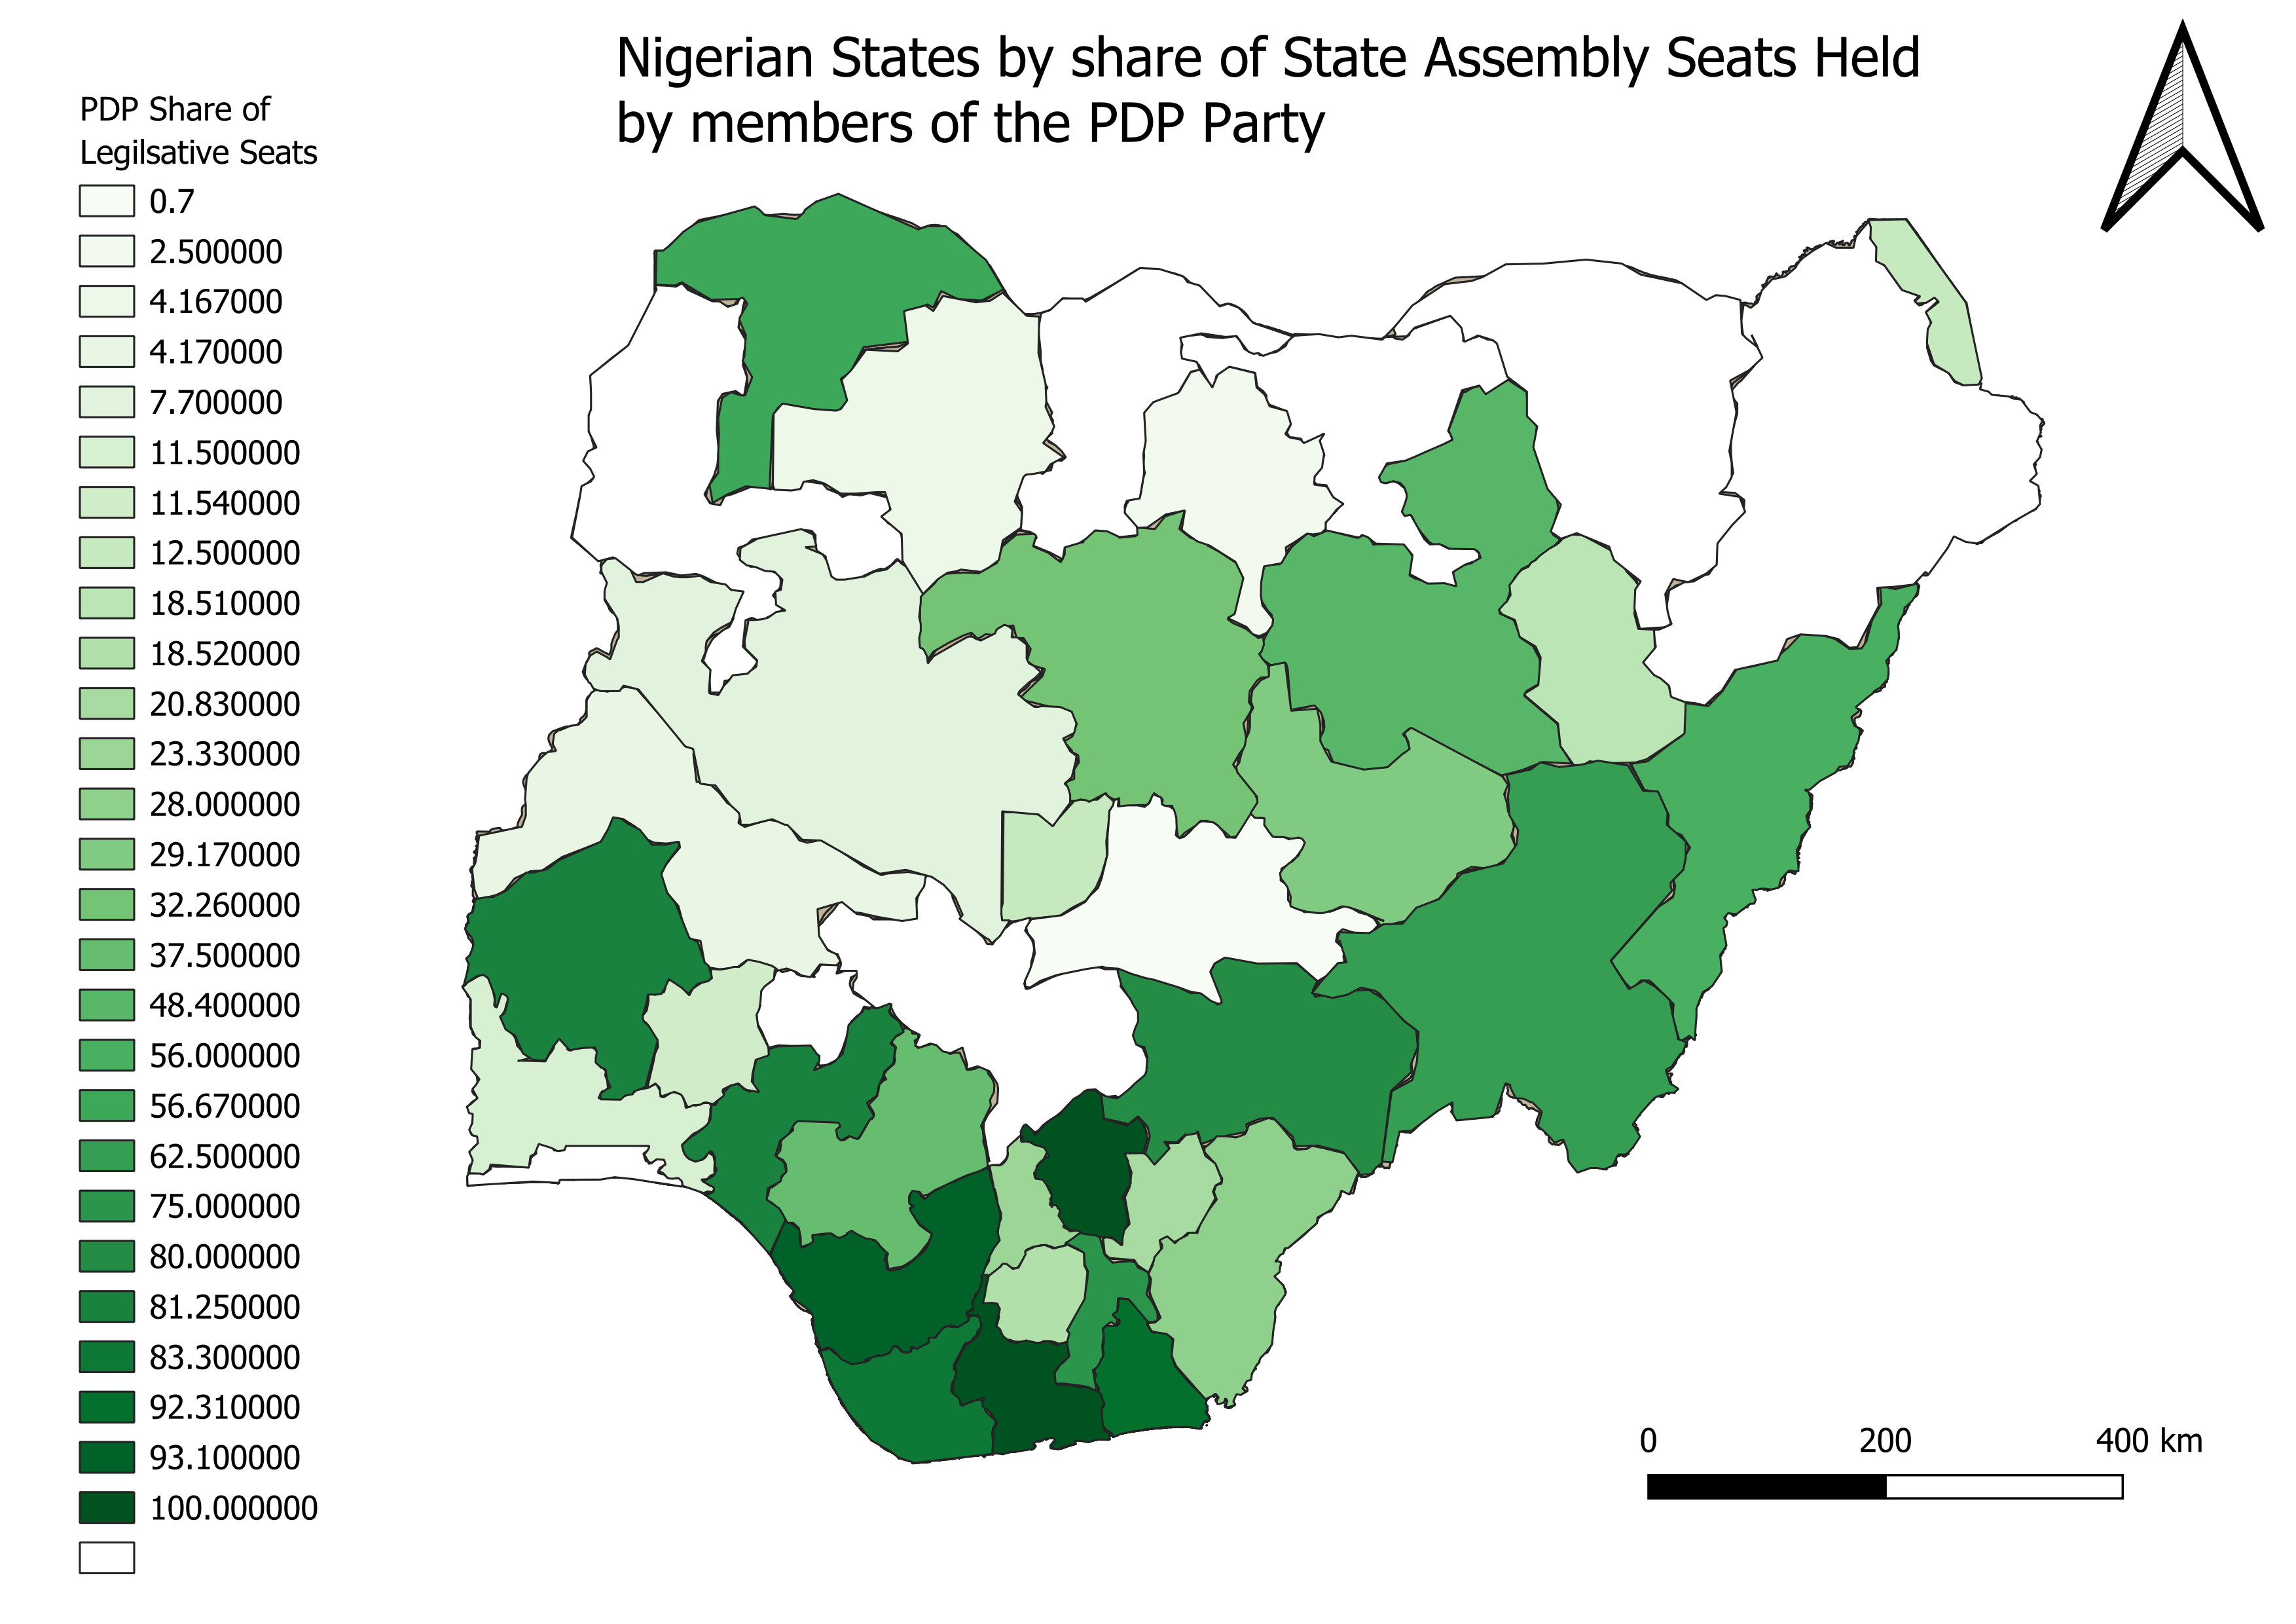 Share of PDP Seats in State Assemblies